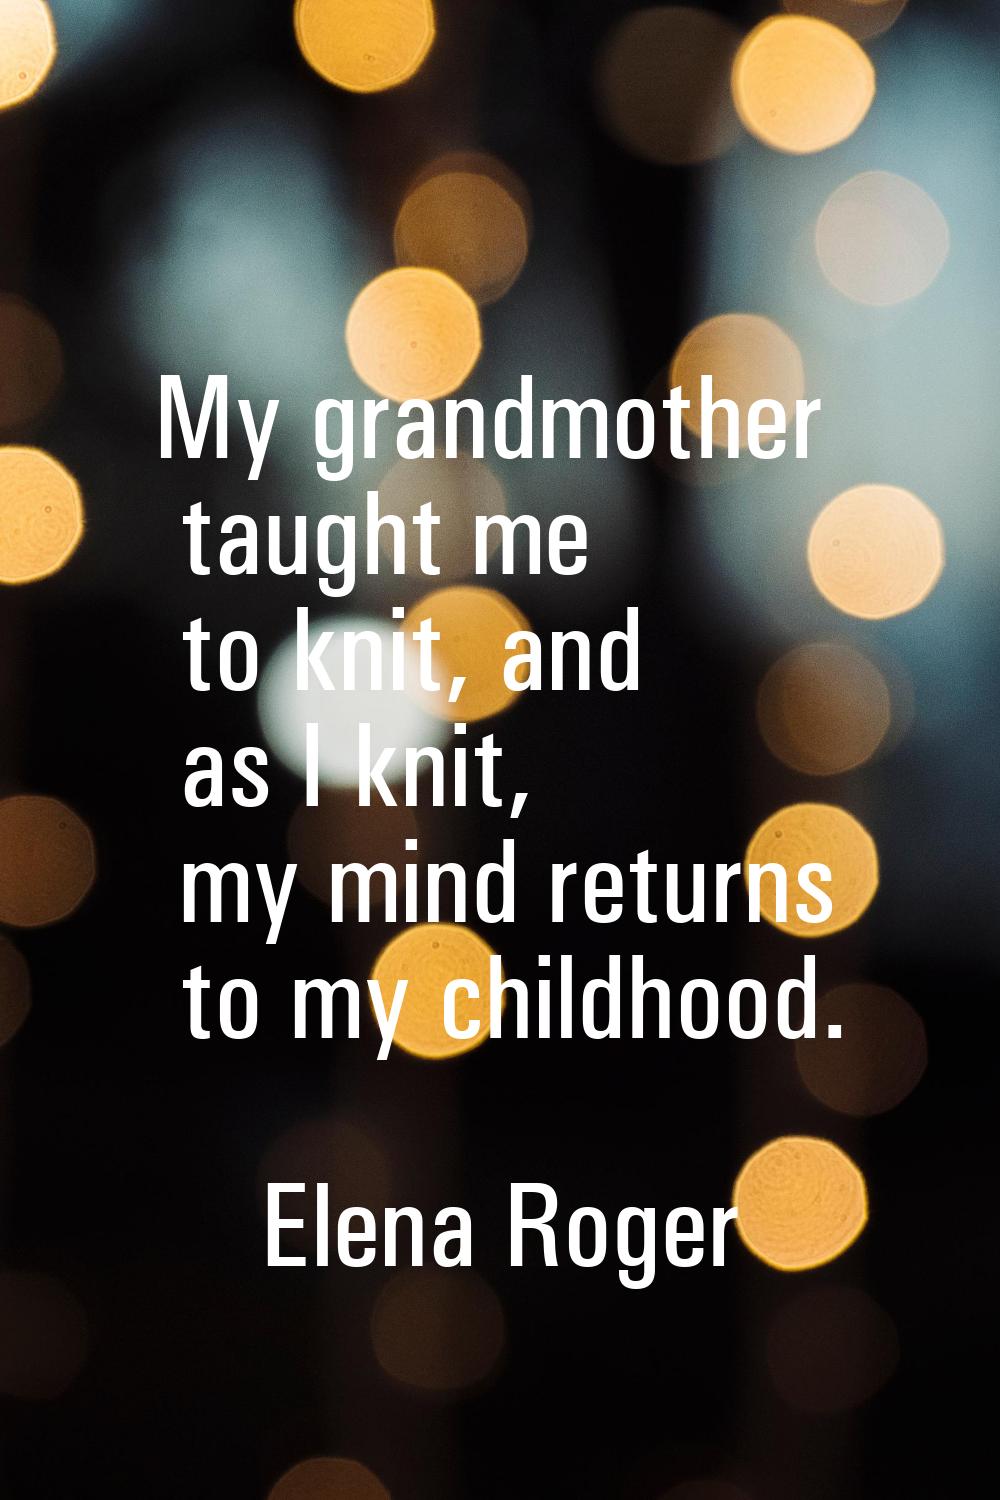 My grandmother taught me to knit, and as I knit, my mind returns to my childhood.